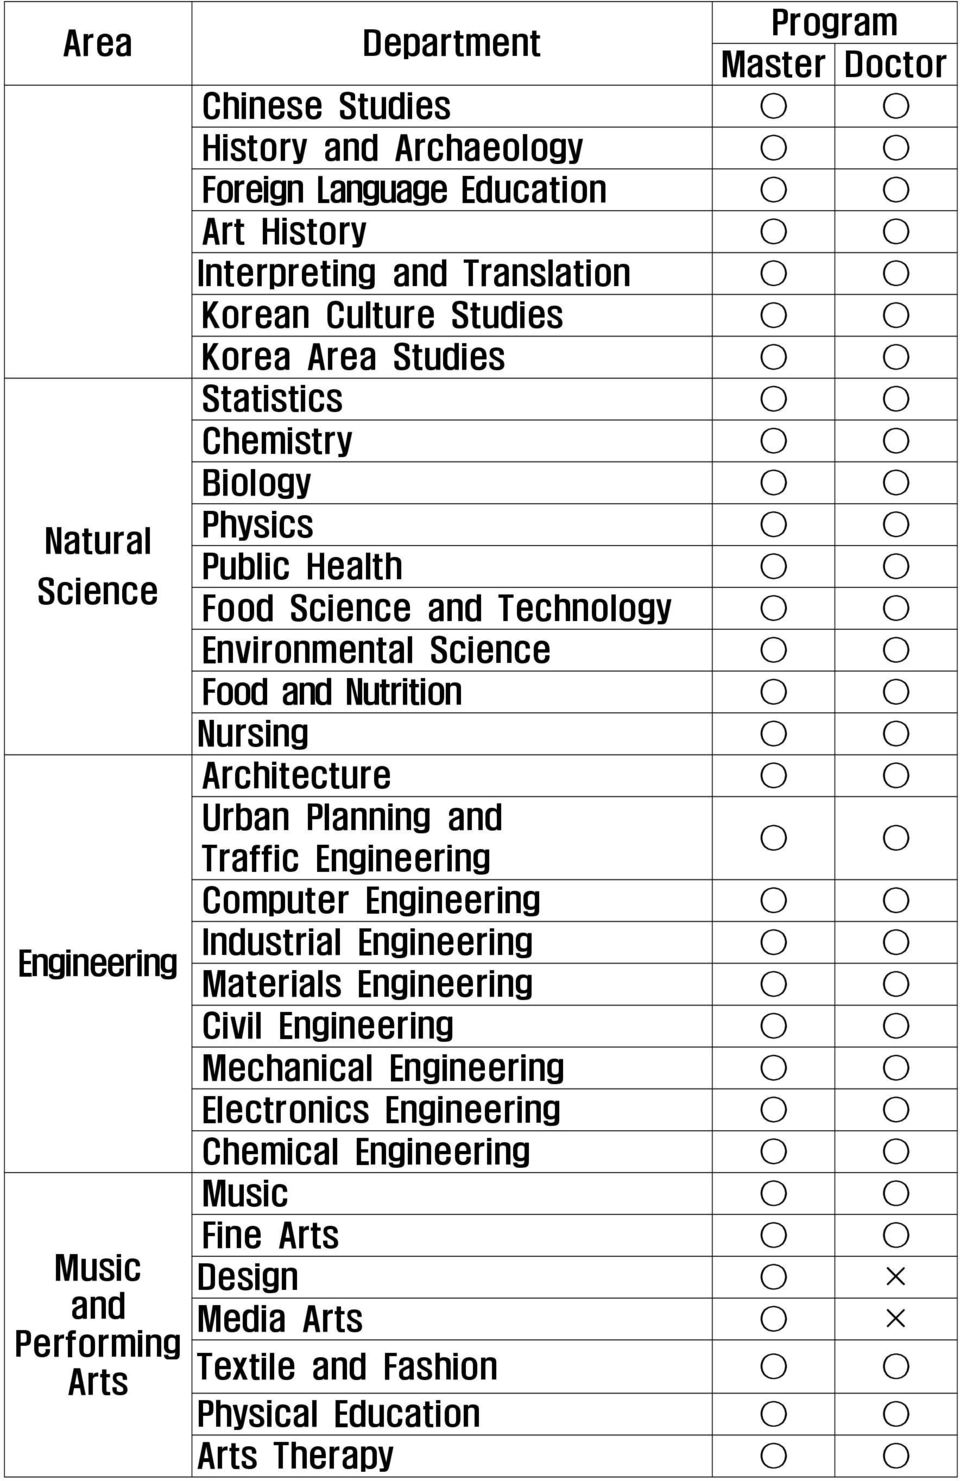 Environmental Science Food and Nutrition Nursing Architecture Urban Planning and Traffic Engineering Computer Engineering Industrial Engineering Materials